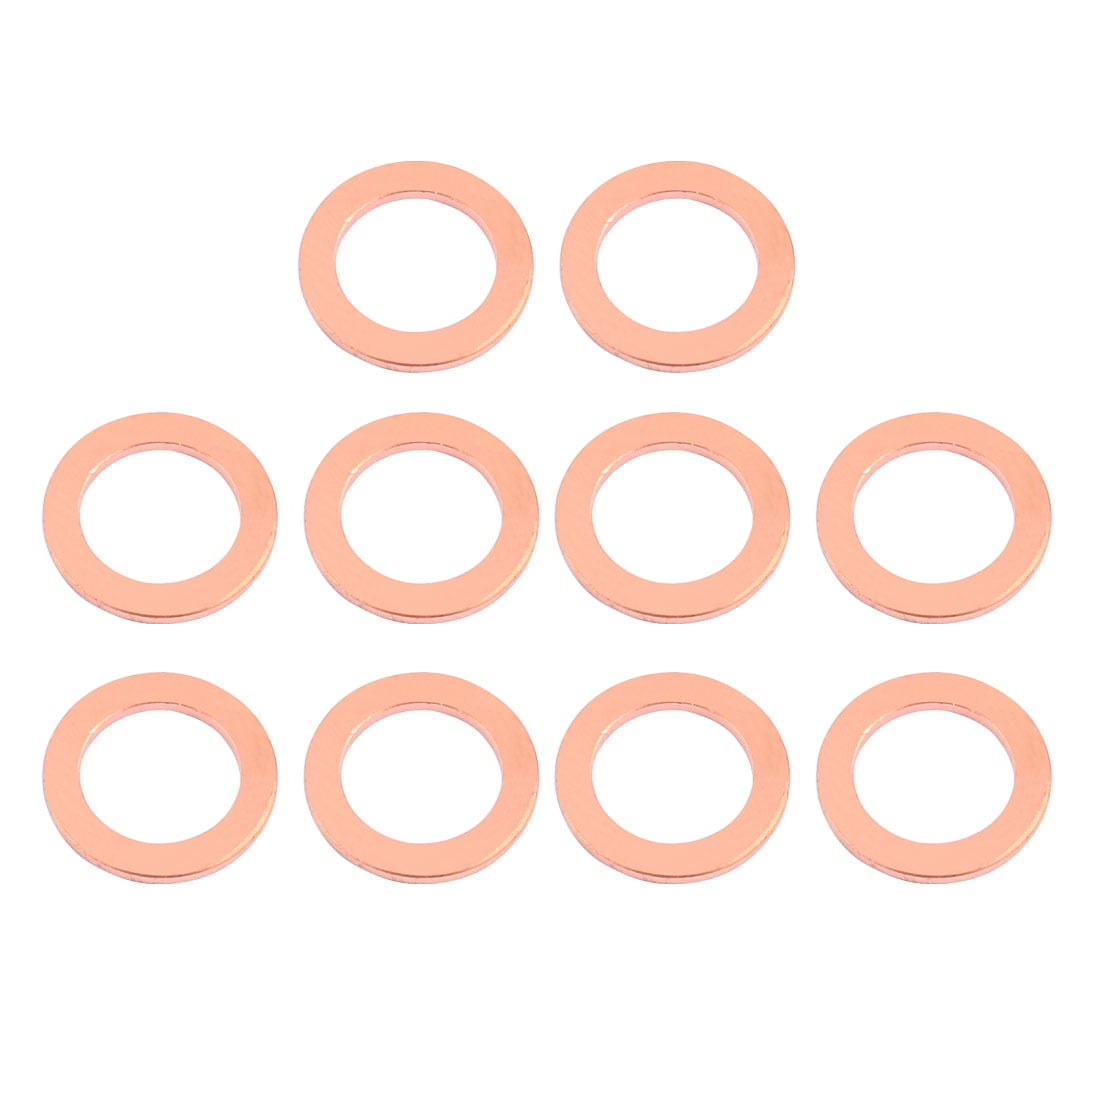 Details about   10Pcs24 mm x 14 mm x 2mm Flat Ring Copper Crush Washer Sealing Gasket Fastener # 